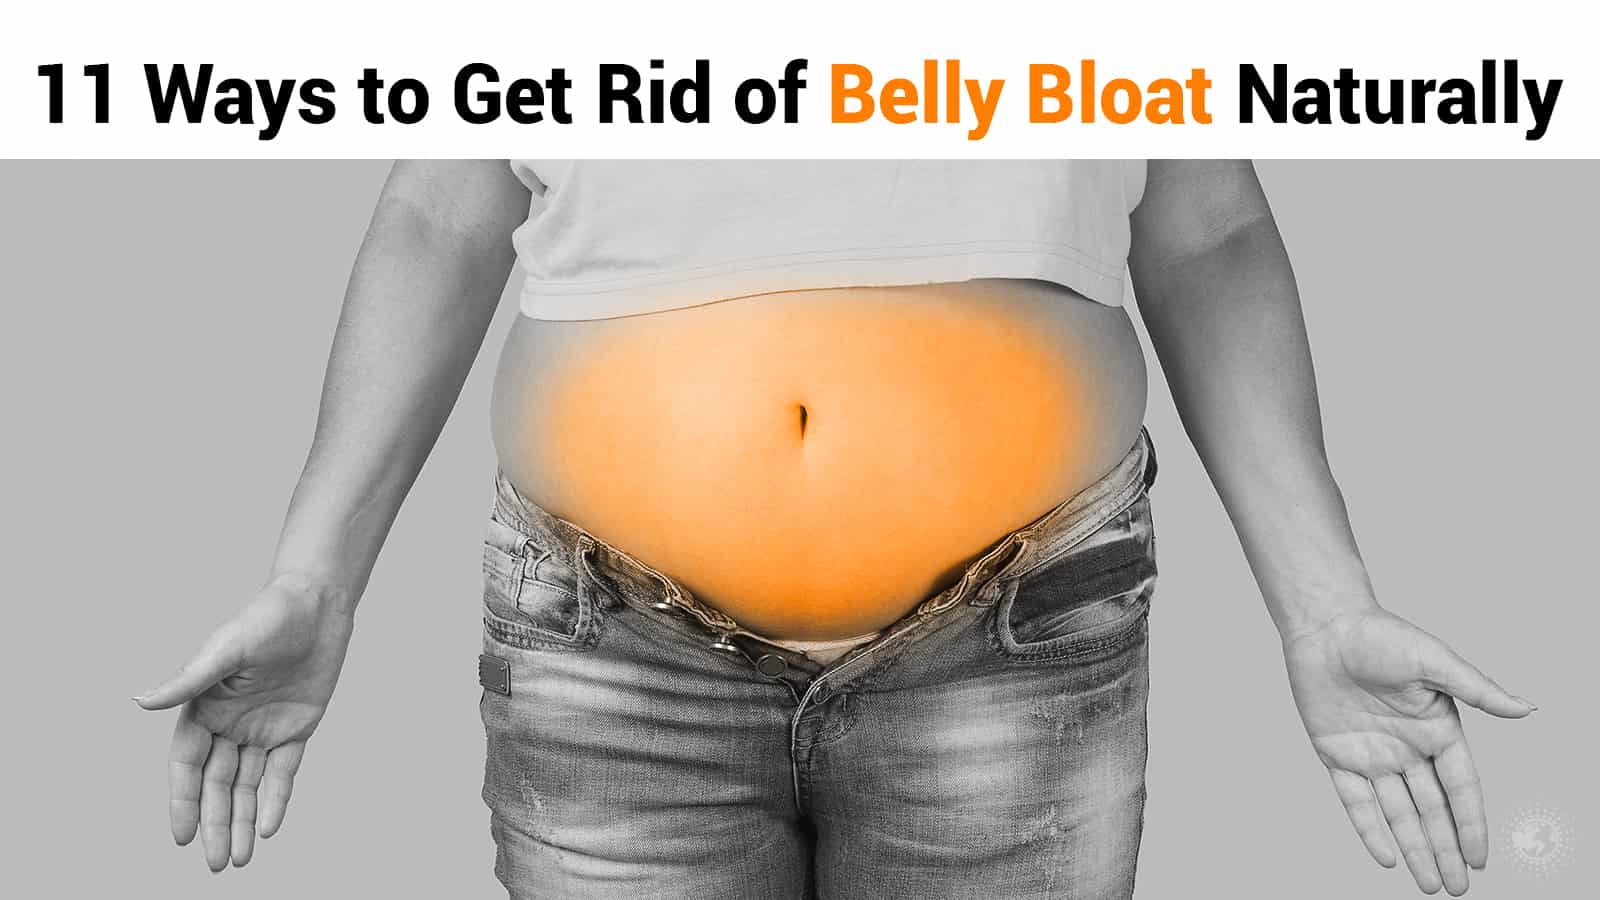 How to get rid of BELLY BLOAT fast